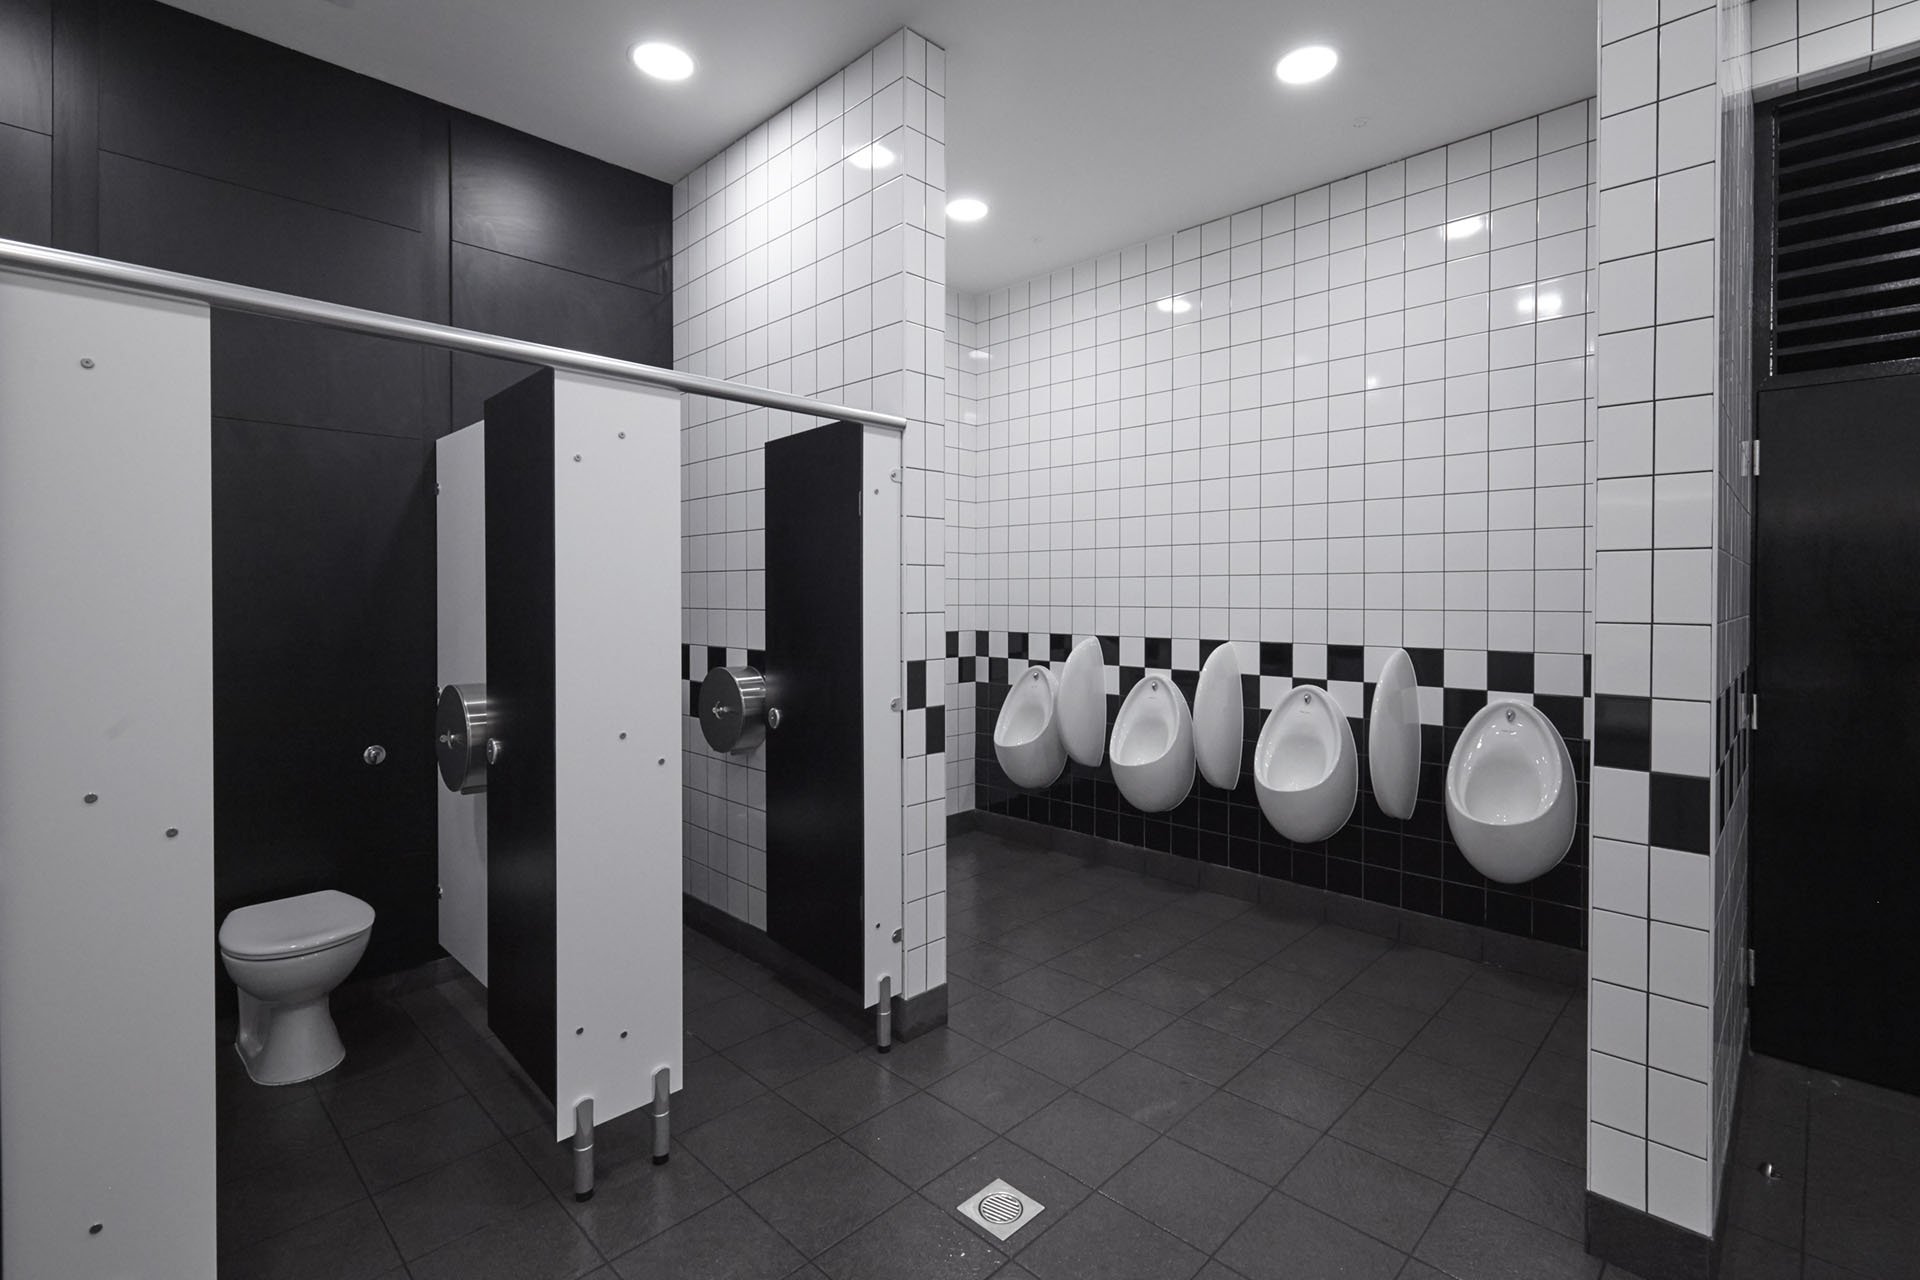 coventry bus station washroom with grey full height duct panels, black and white toilet cubicles, black and white tiling and urinals.jpg